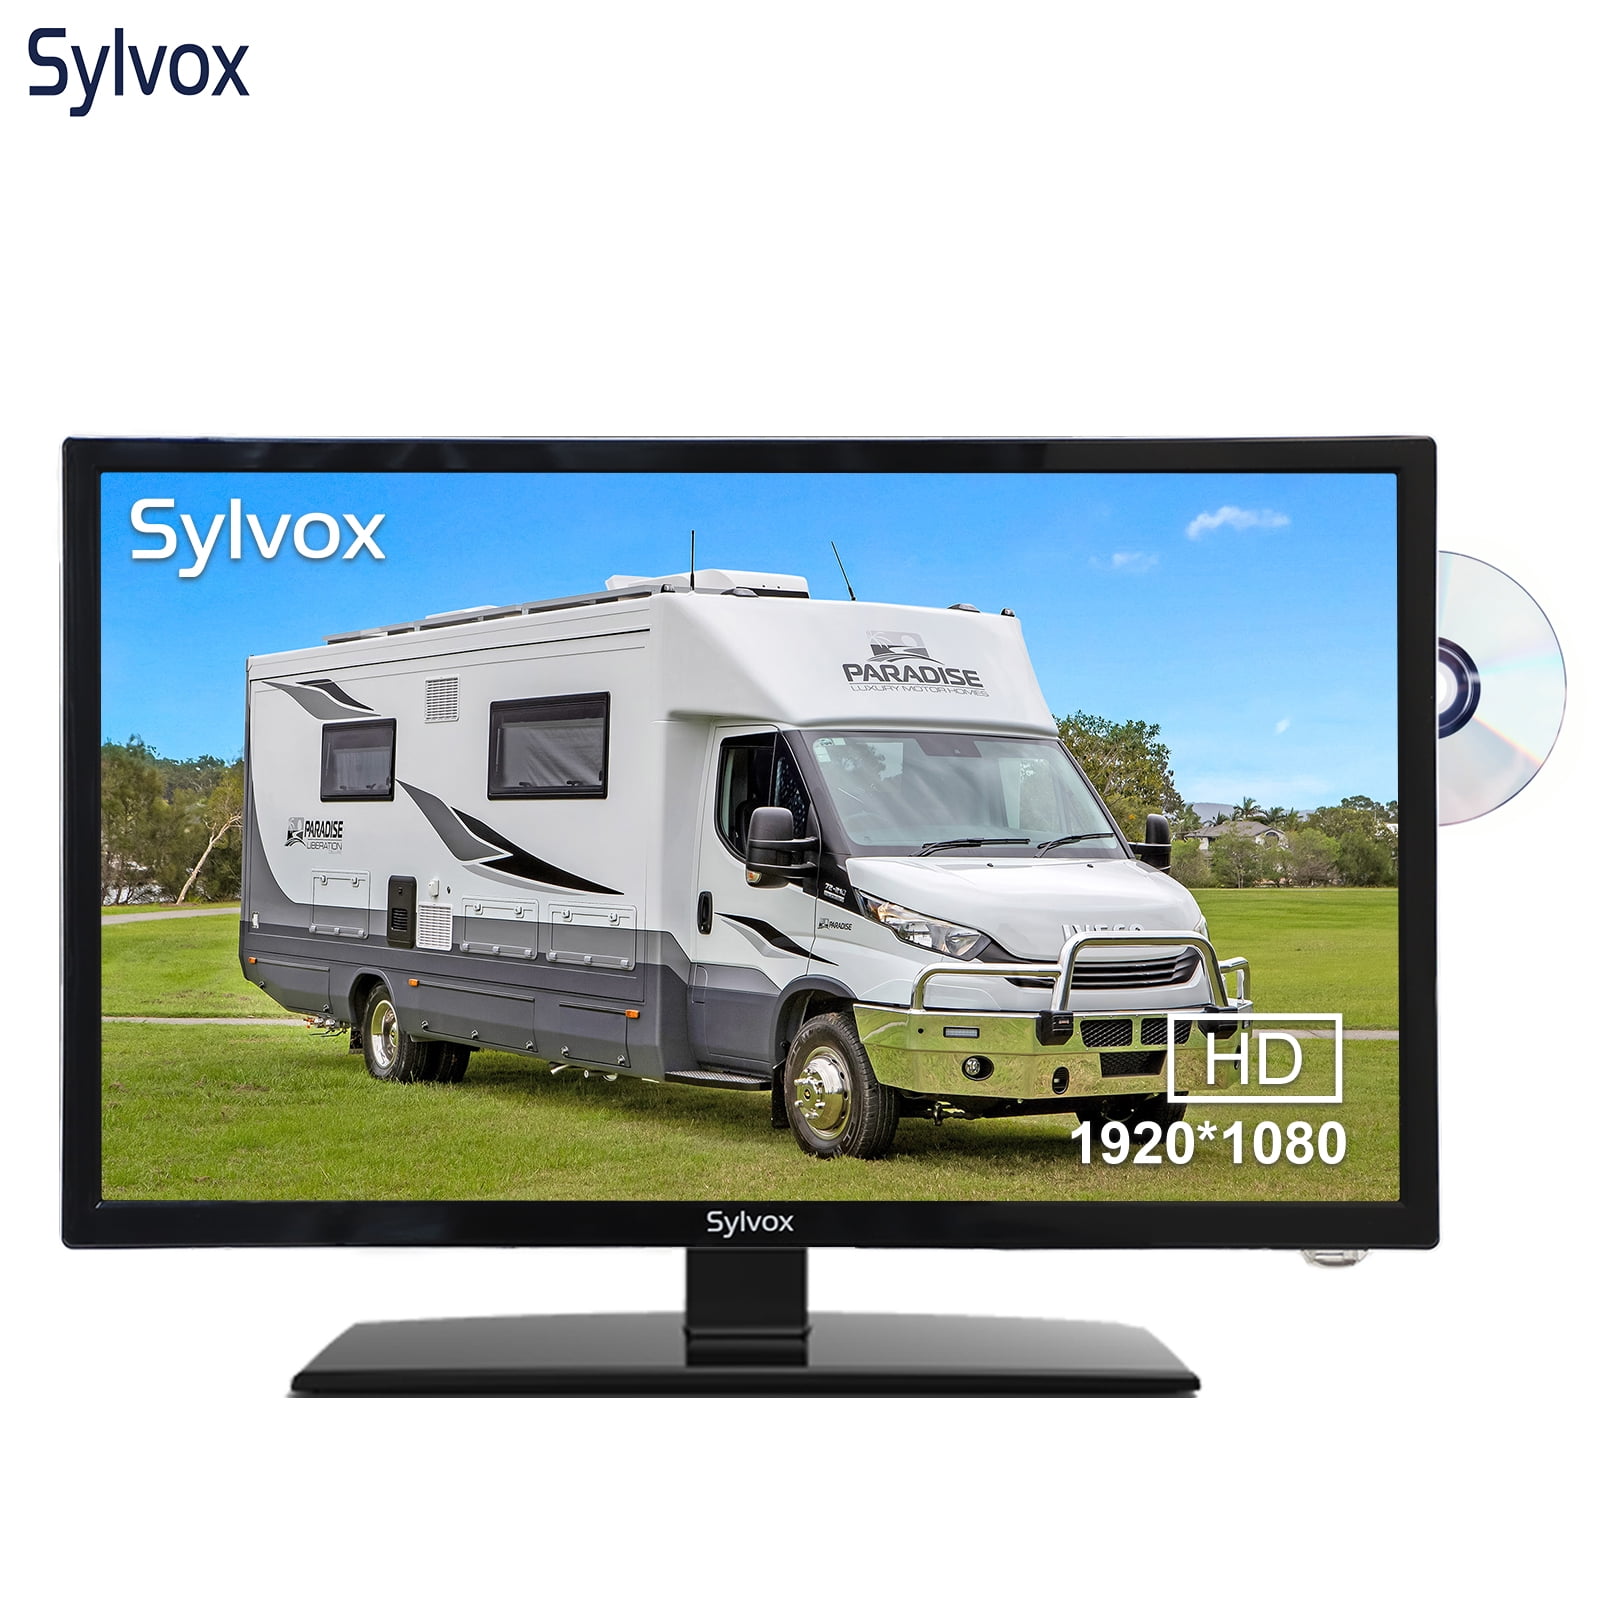 Sylvox 27 inch RV TV, 12 Volt TV with DVD Player, 1080P FHD Television  Built in ATSC Tuner, FM Radio, with HDMI/USB/VGA Input, 12V TV for RV